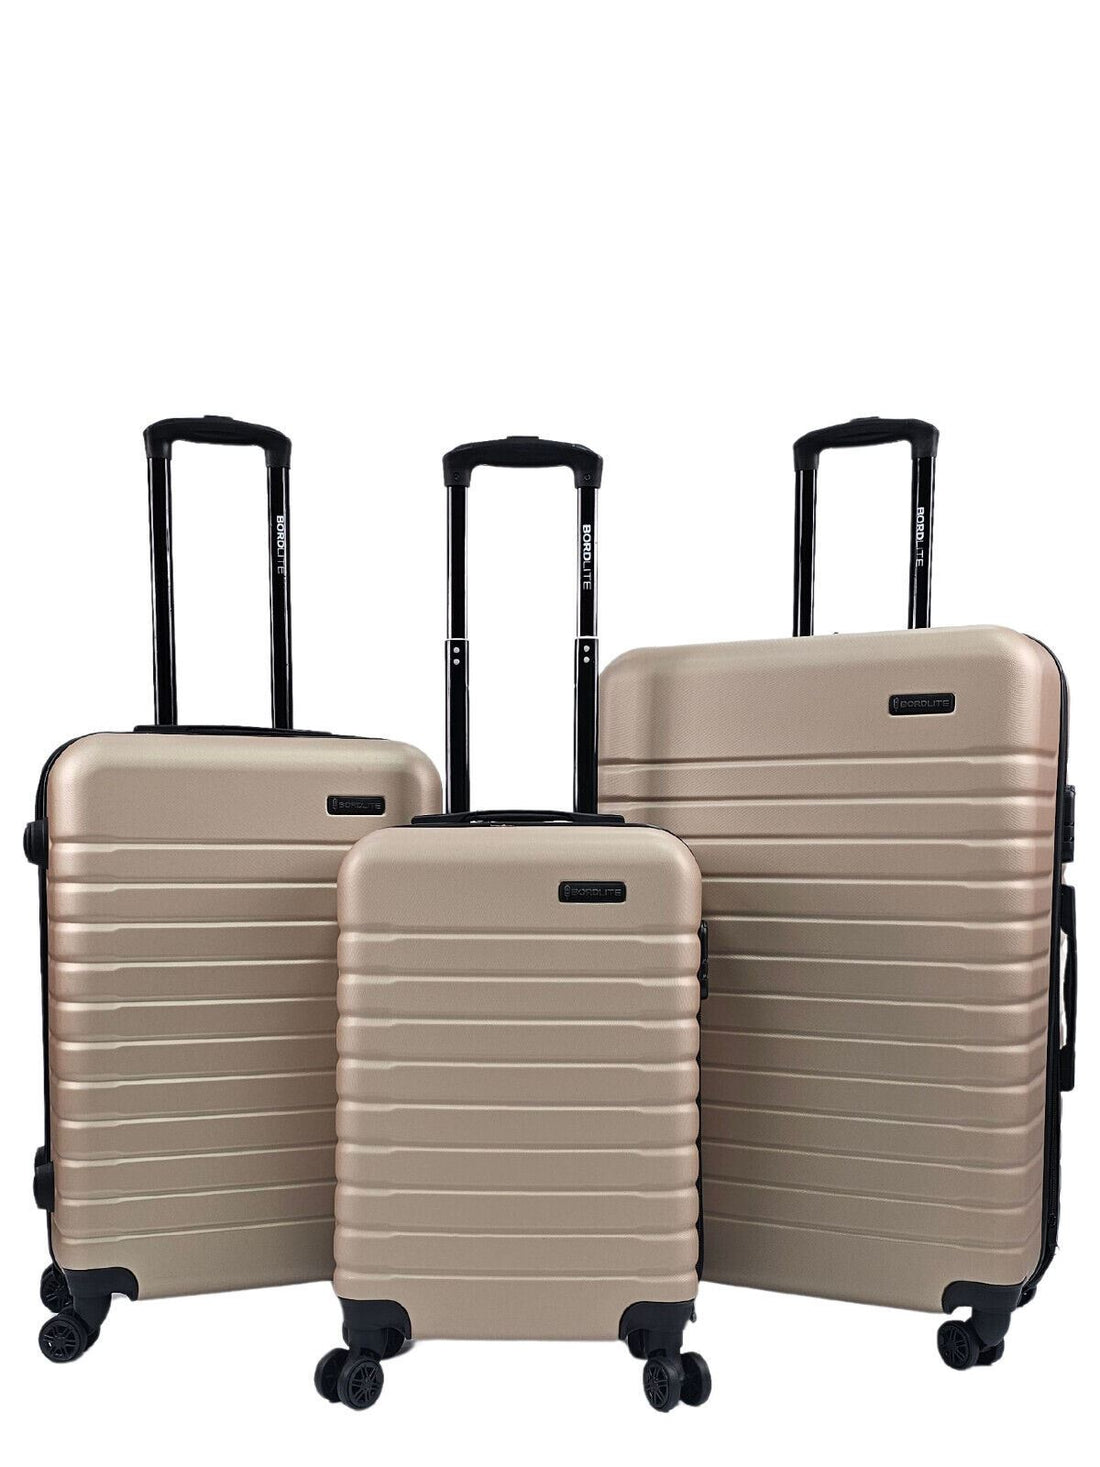 Lightweight Gold Hard Shell ABS Suitcase Set Luggage Travel Trolley Cabin Cases